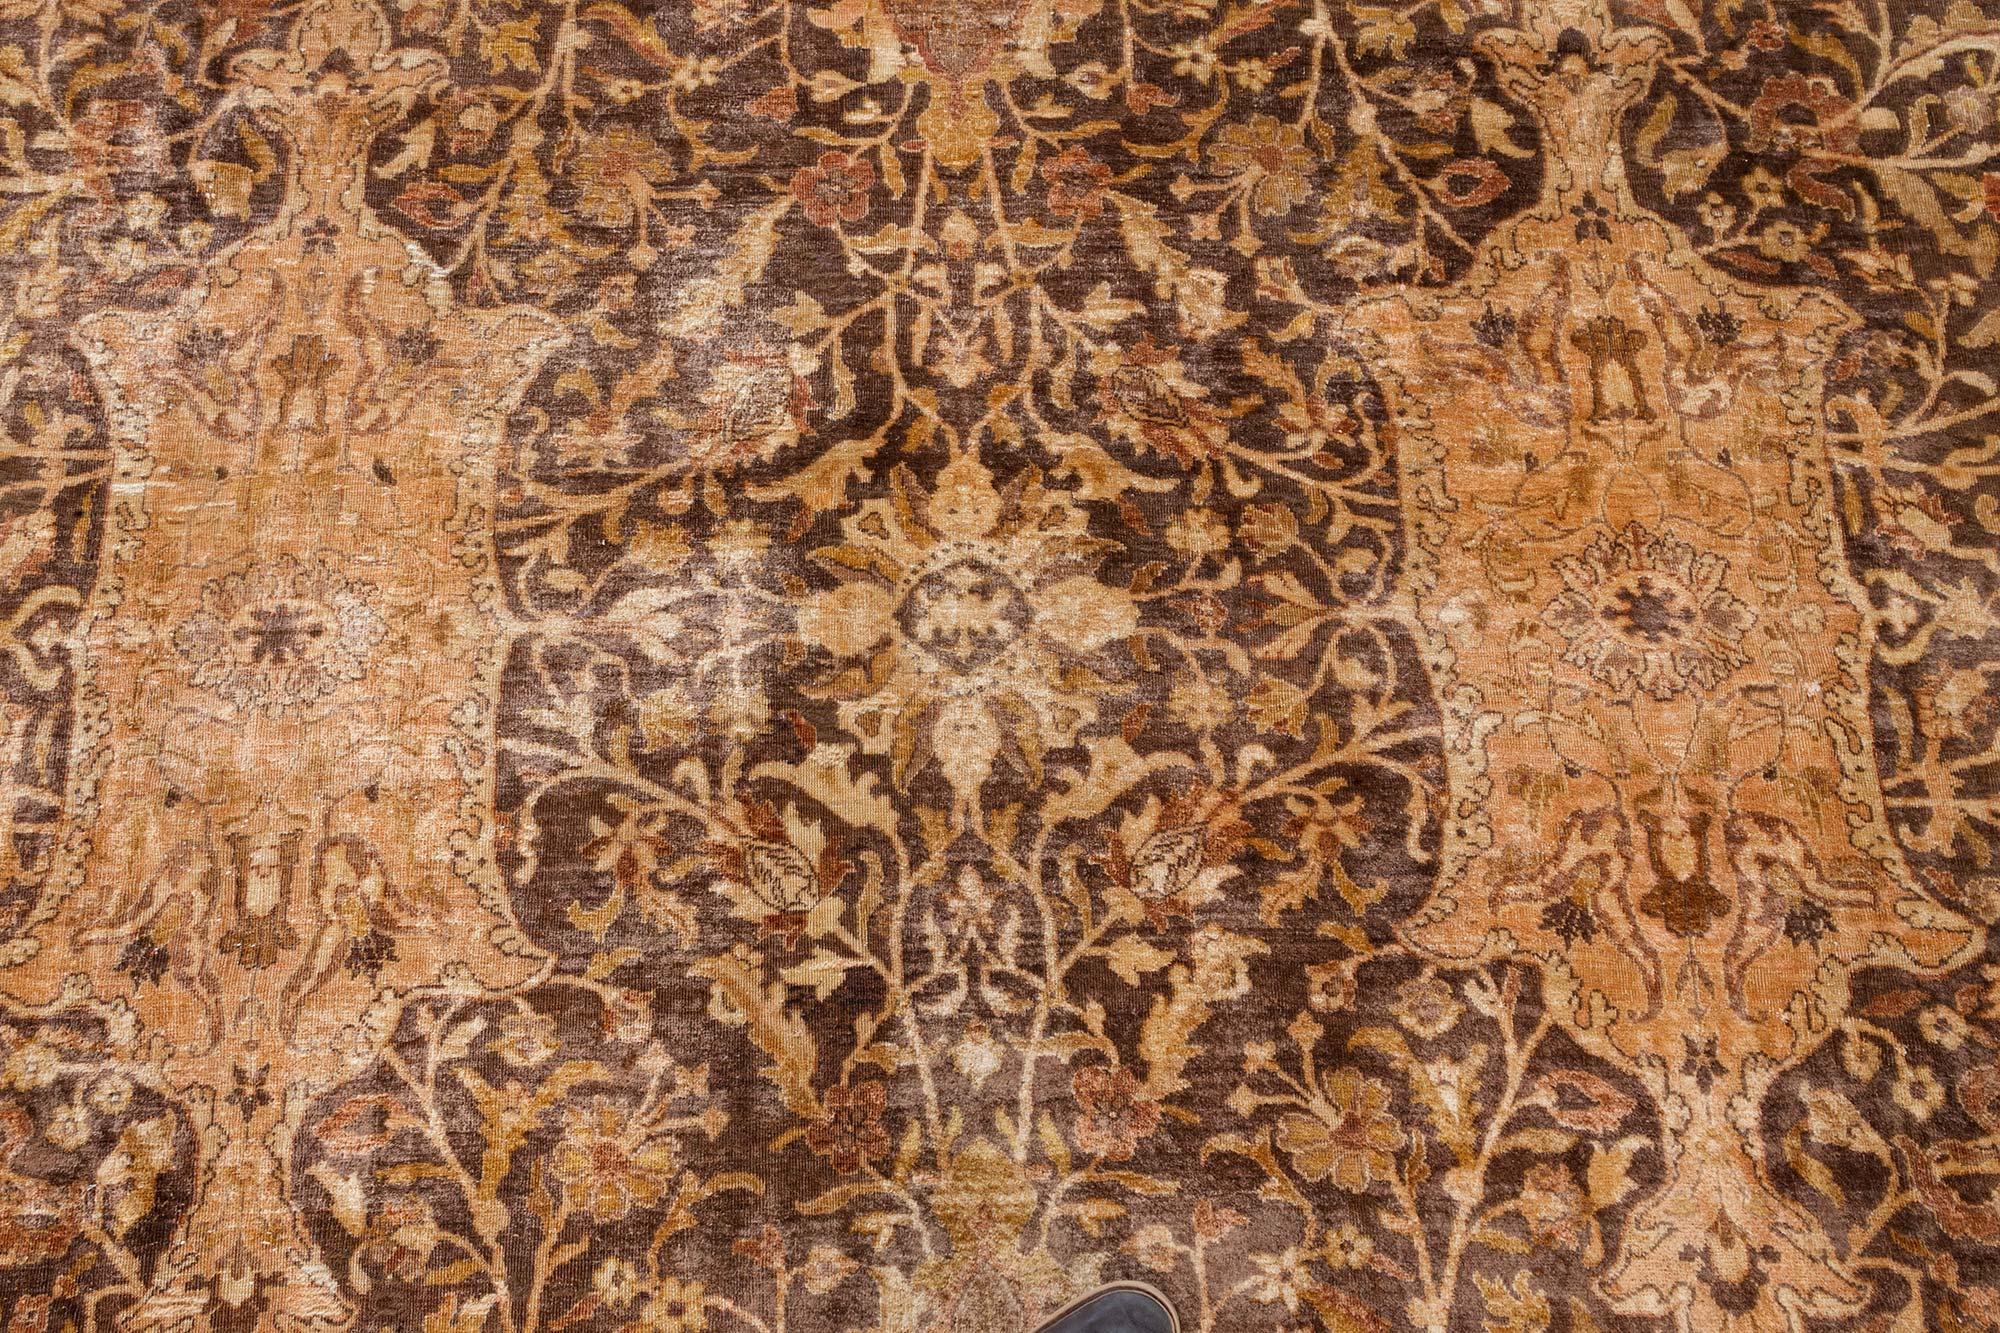 Early 20th Century Indian Chocolate Brown Handmade Wool Carpet (Size Adjusted)
Size: 12'9